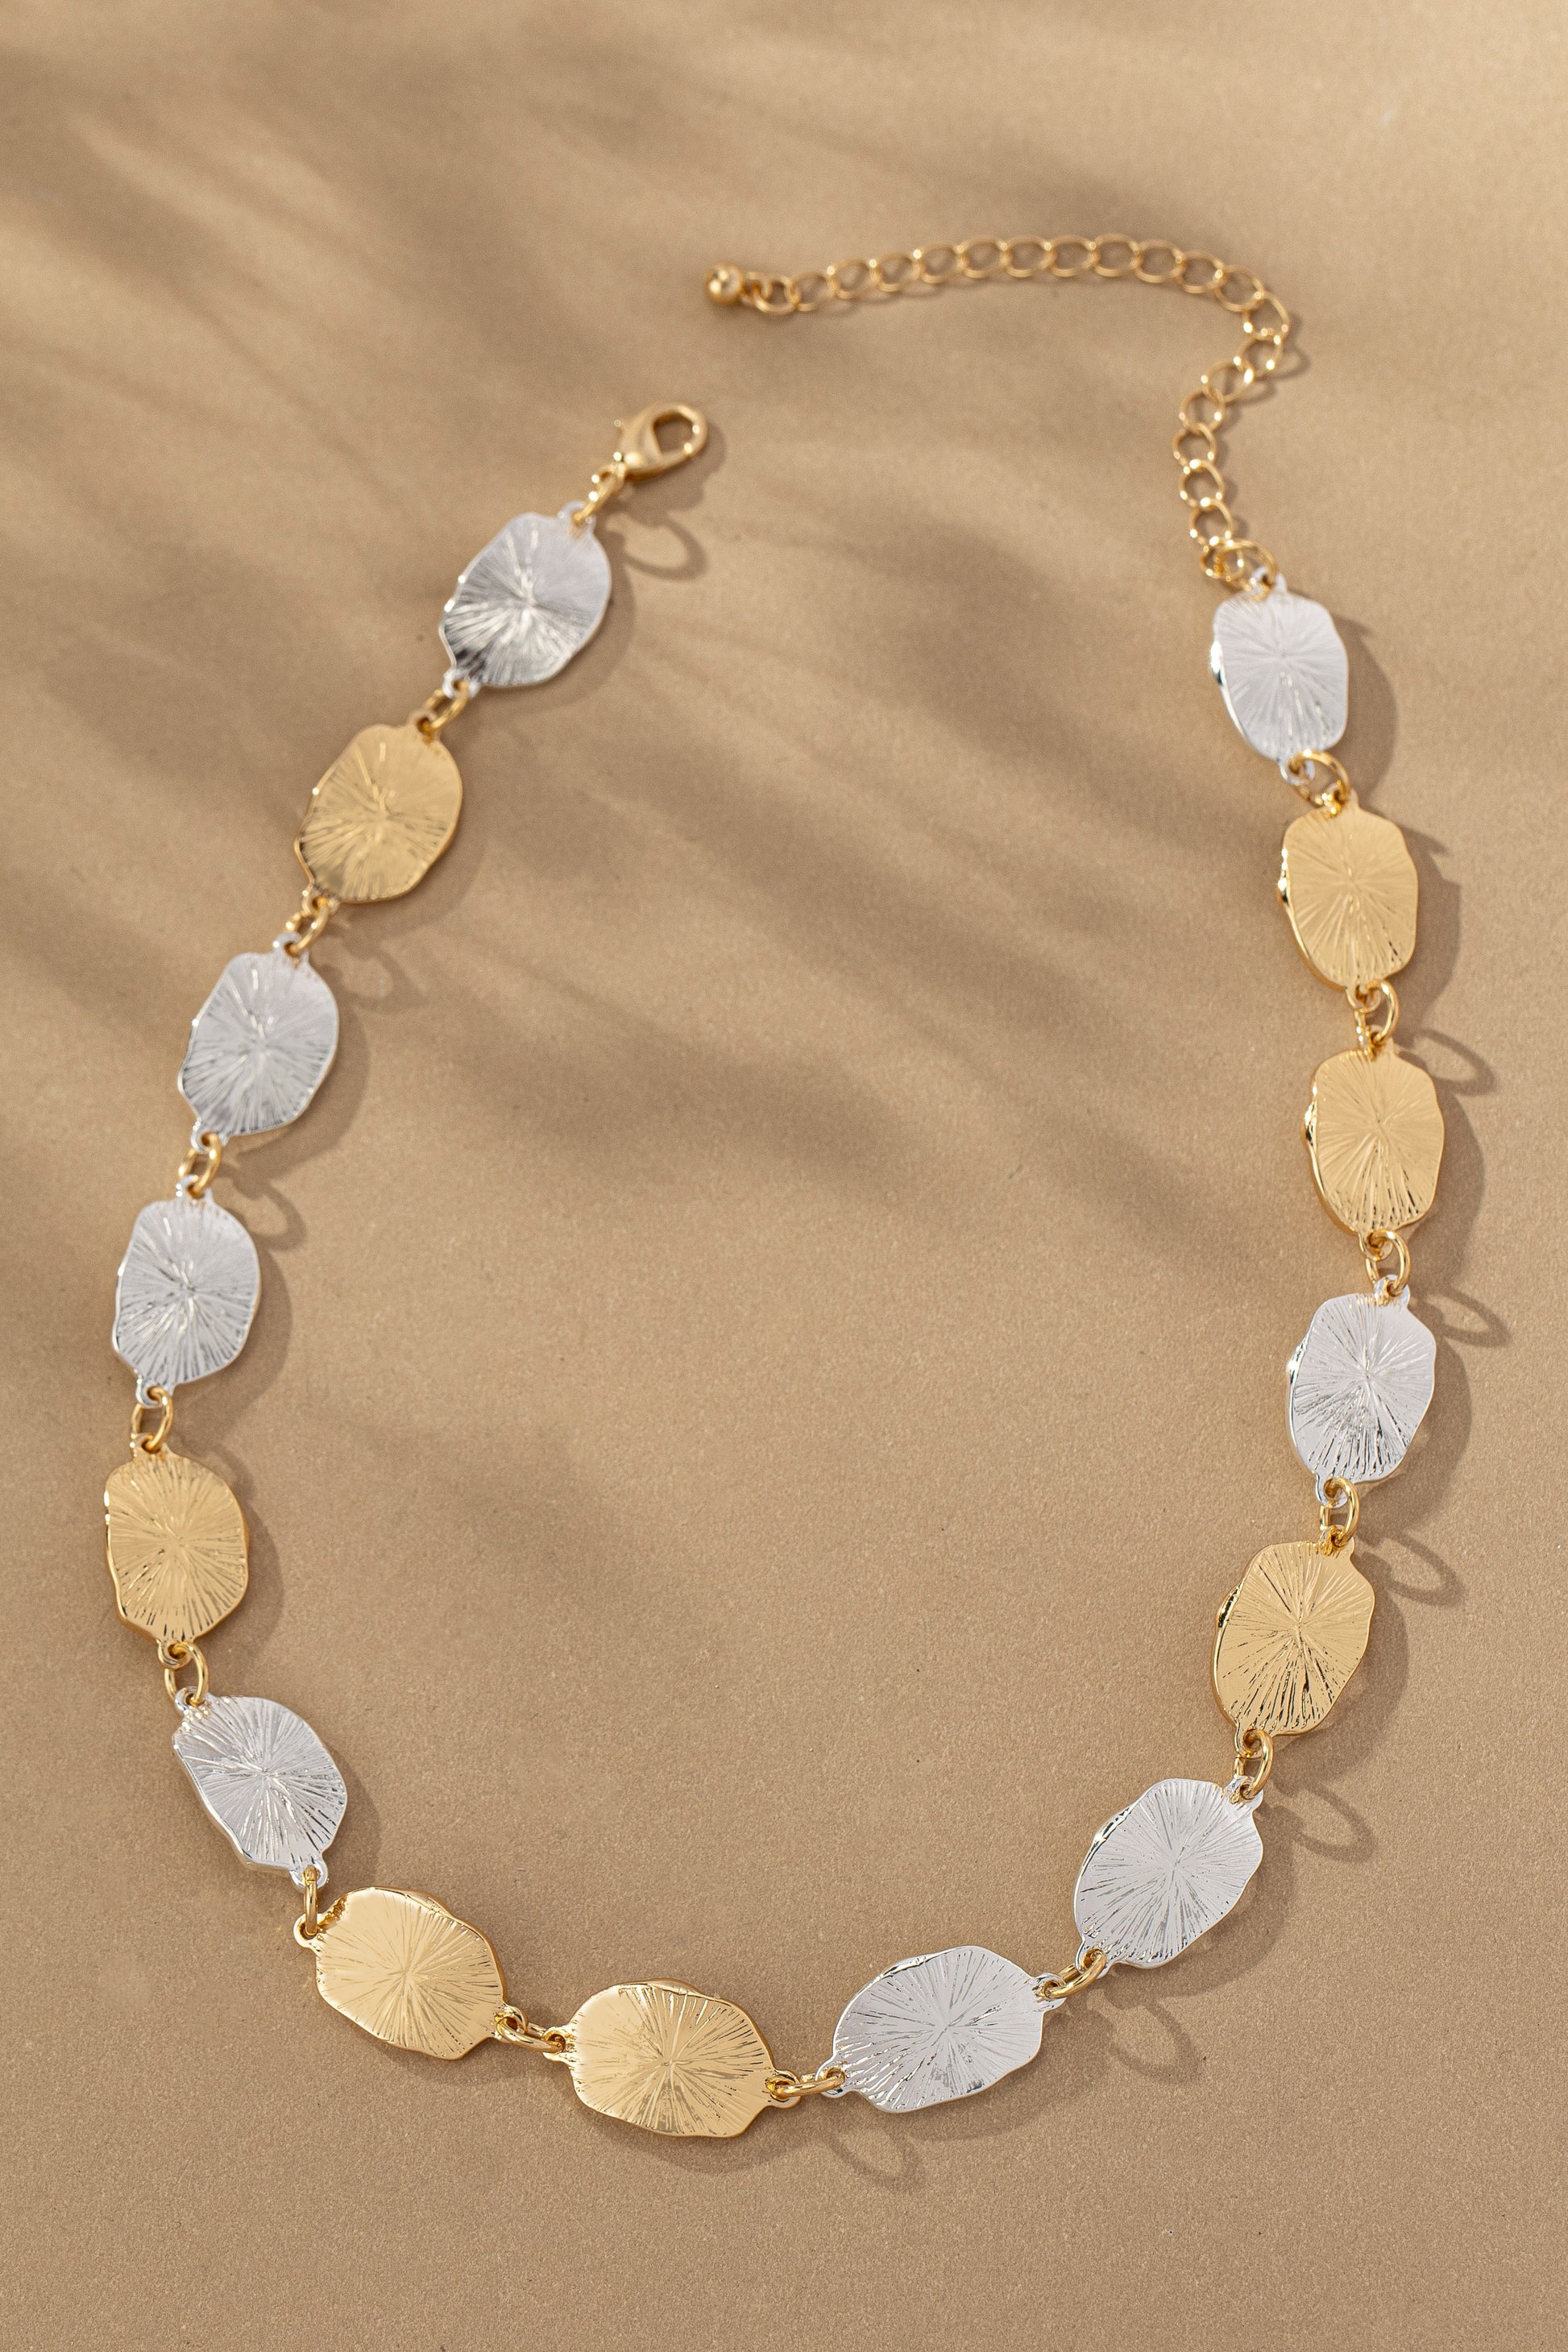 Two Tone Irregular Shape Hammered Beaded Necklace from FASHION GO arranged in a semi-circle with a solar ray pattern on a sandy background.